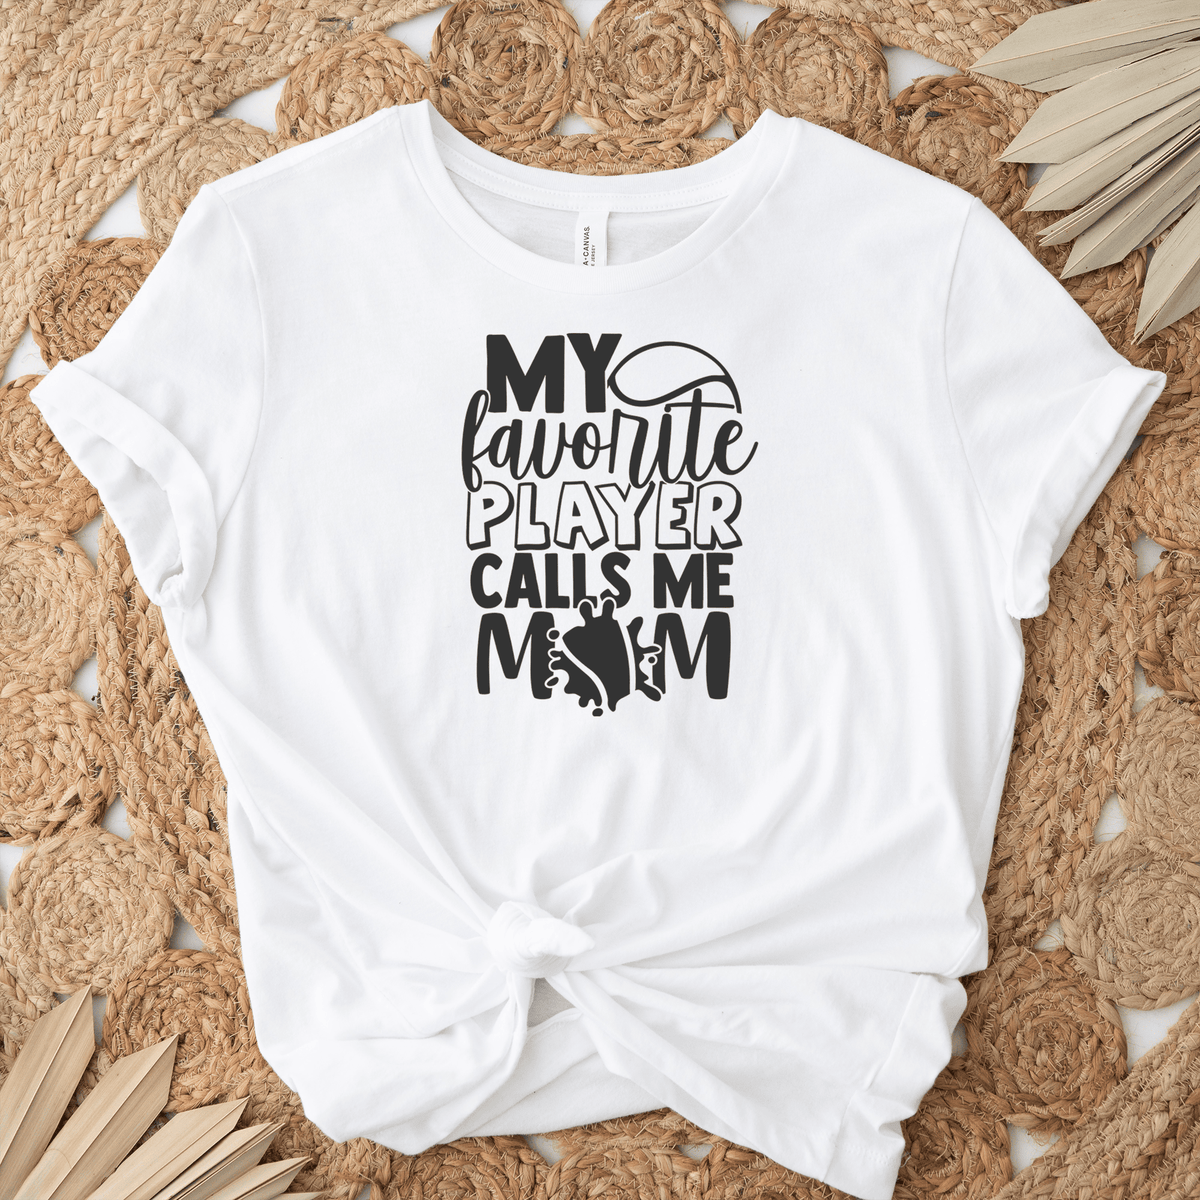 Womens White T Shirt with That-Tennis-Player-Calls-Me-Mom design